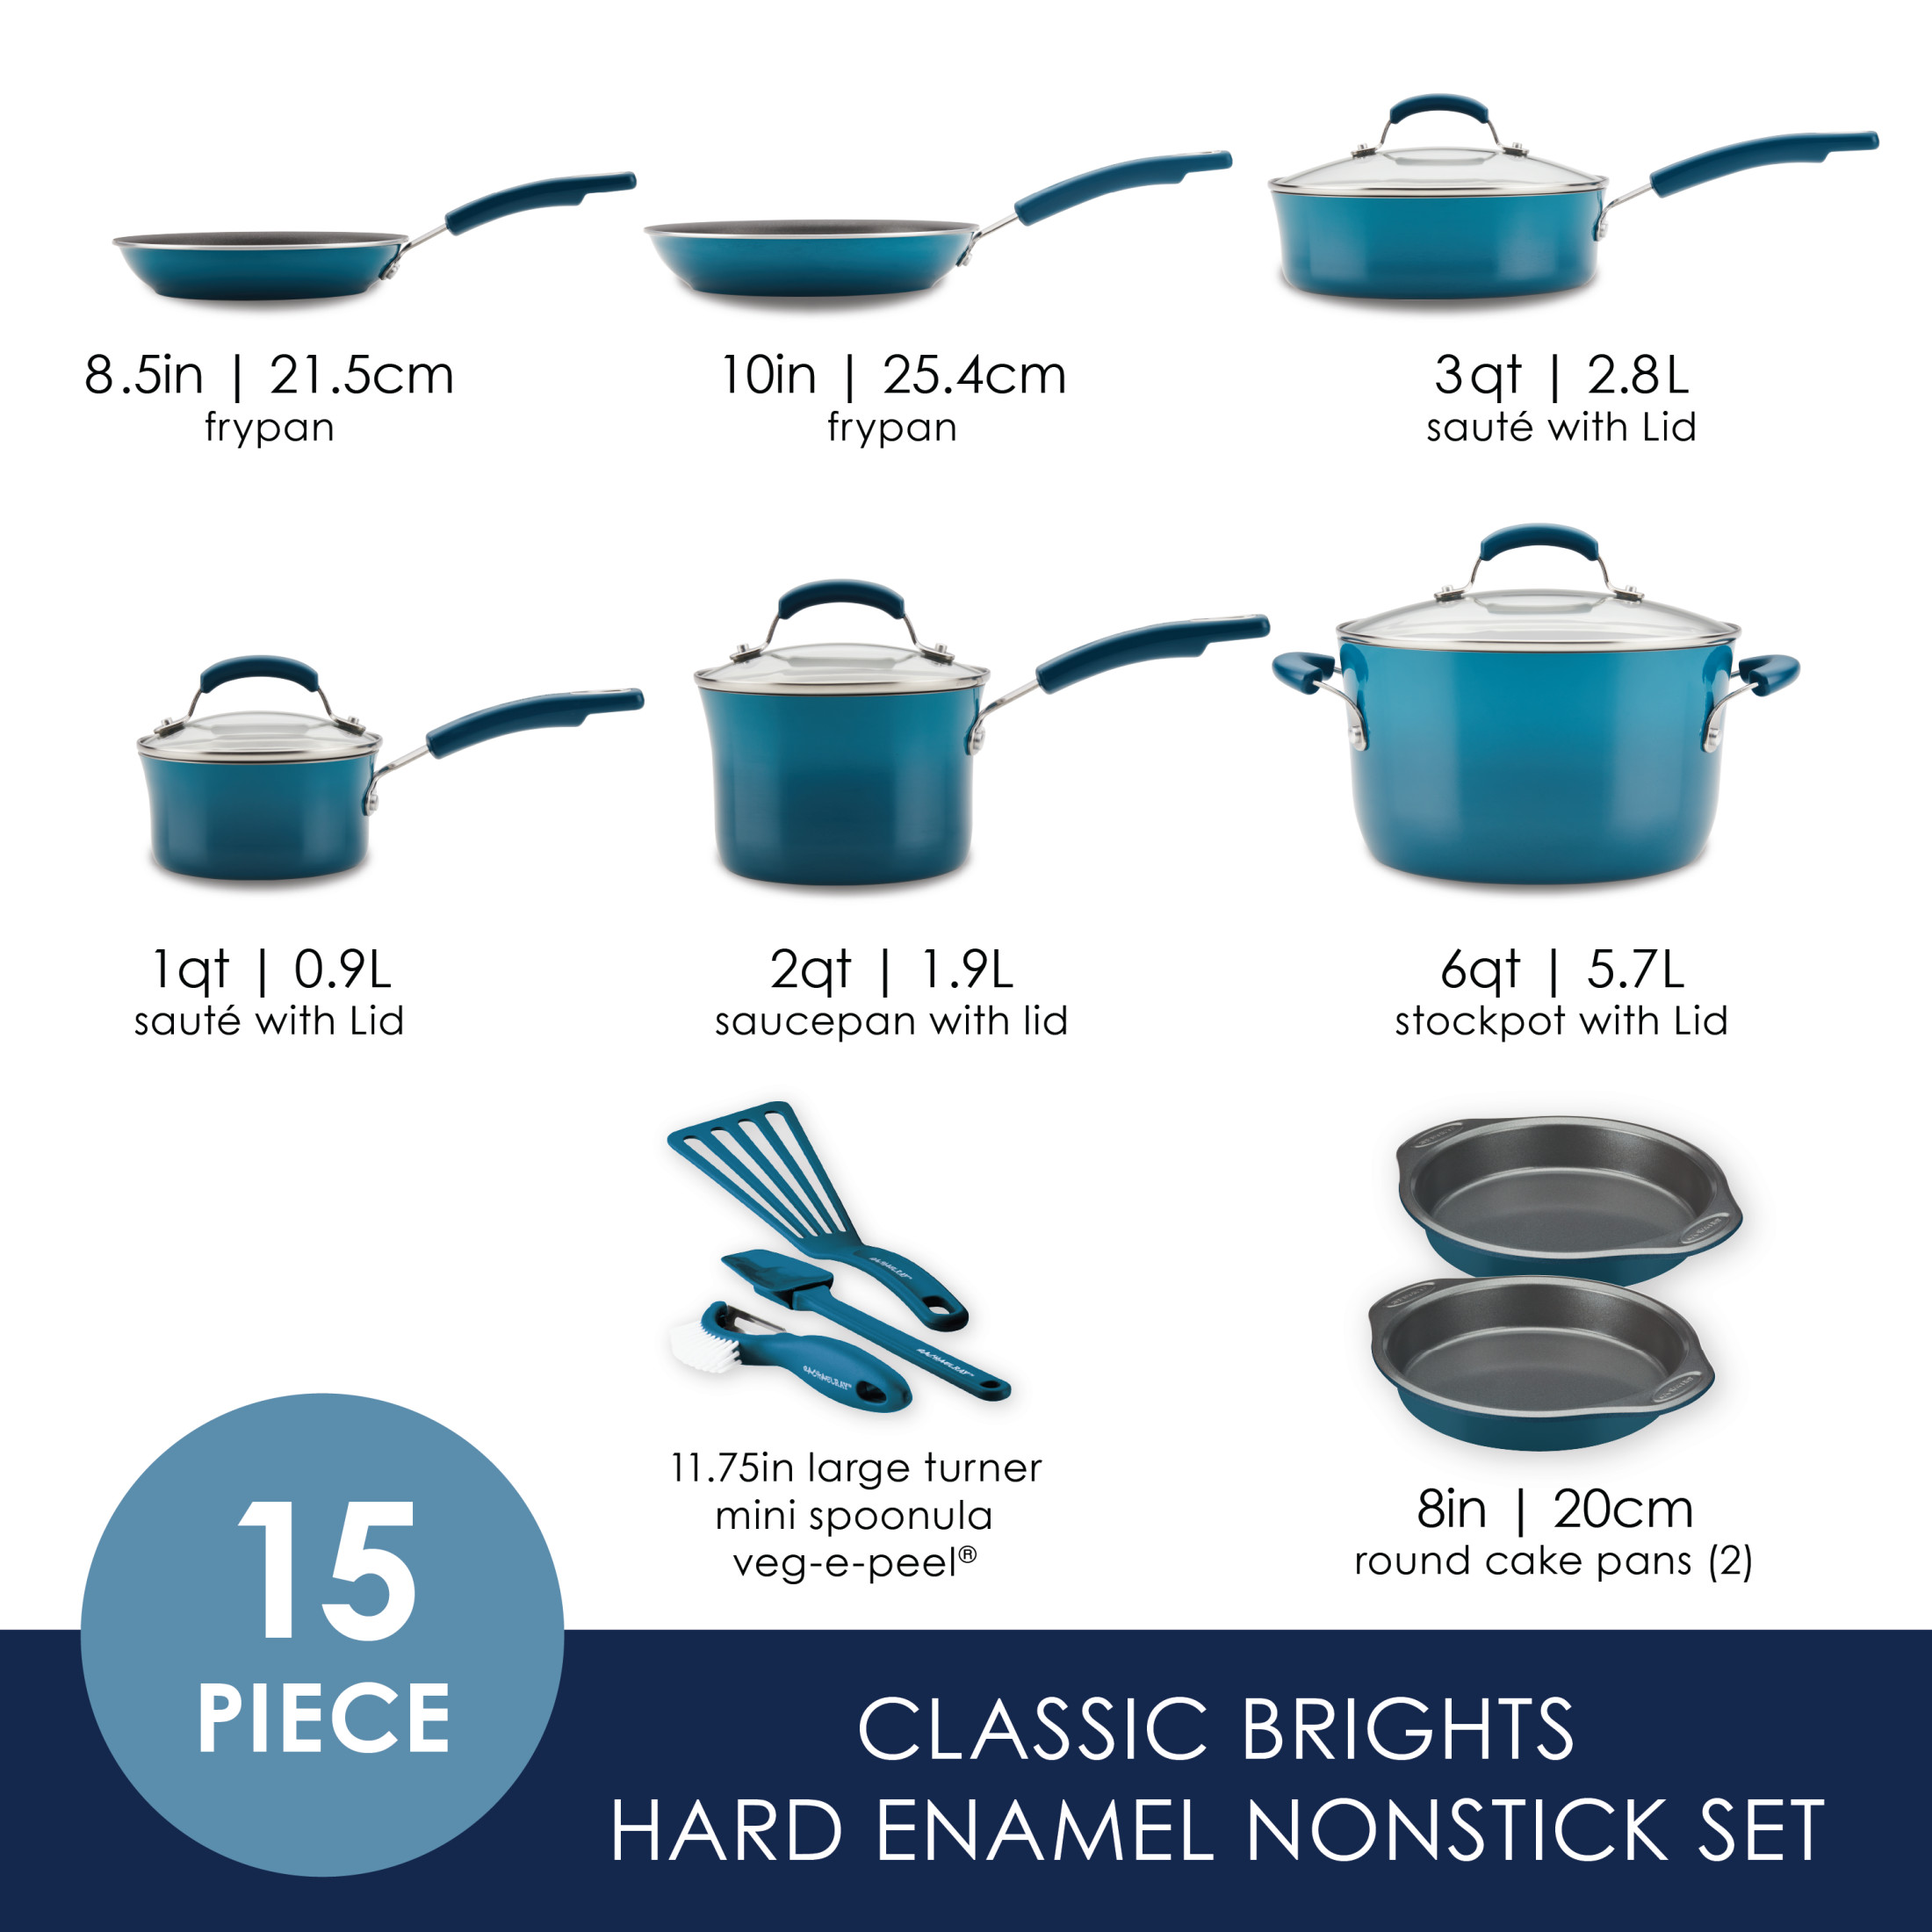 Rachael Ray 15 Piece Nonstick Pots and Pans Set, Marine Blue - image 3 of 15